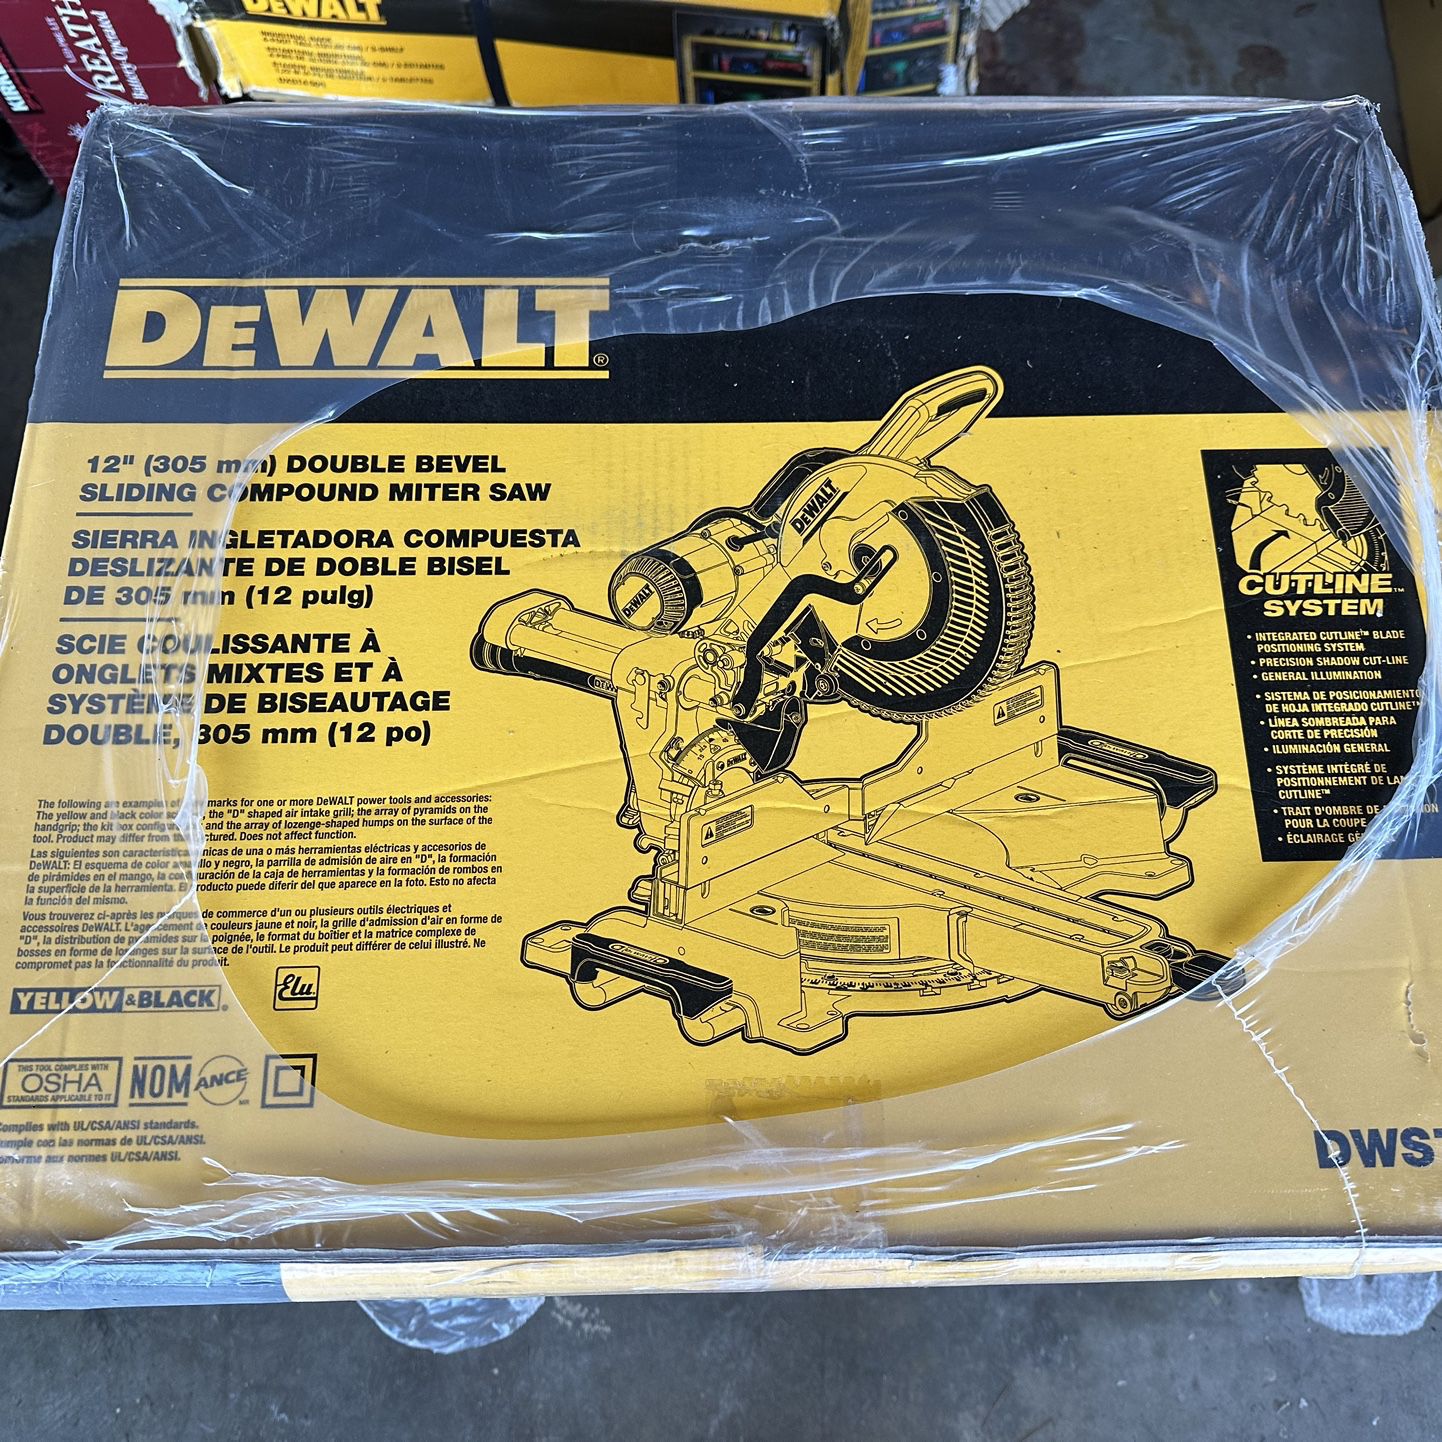 Dewalt 15 Amp Corded 12 in. Double Bevel Sliding Compound Miter Saw with XPS technology, Blade Wrench and Material Clamp